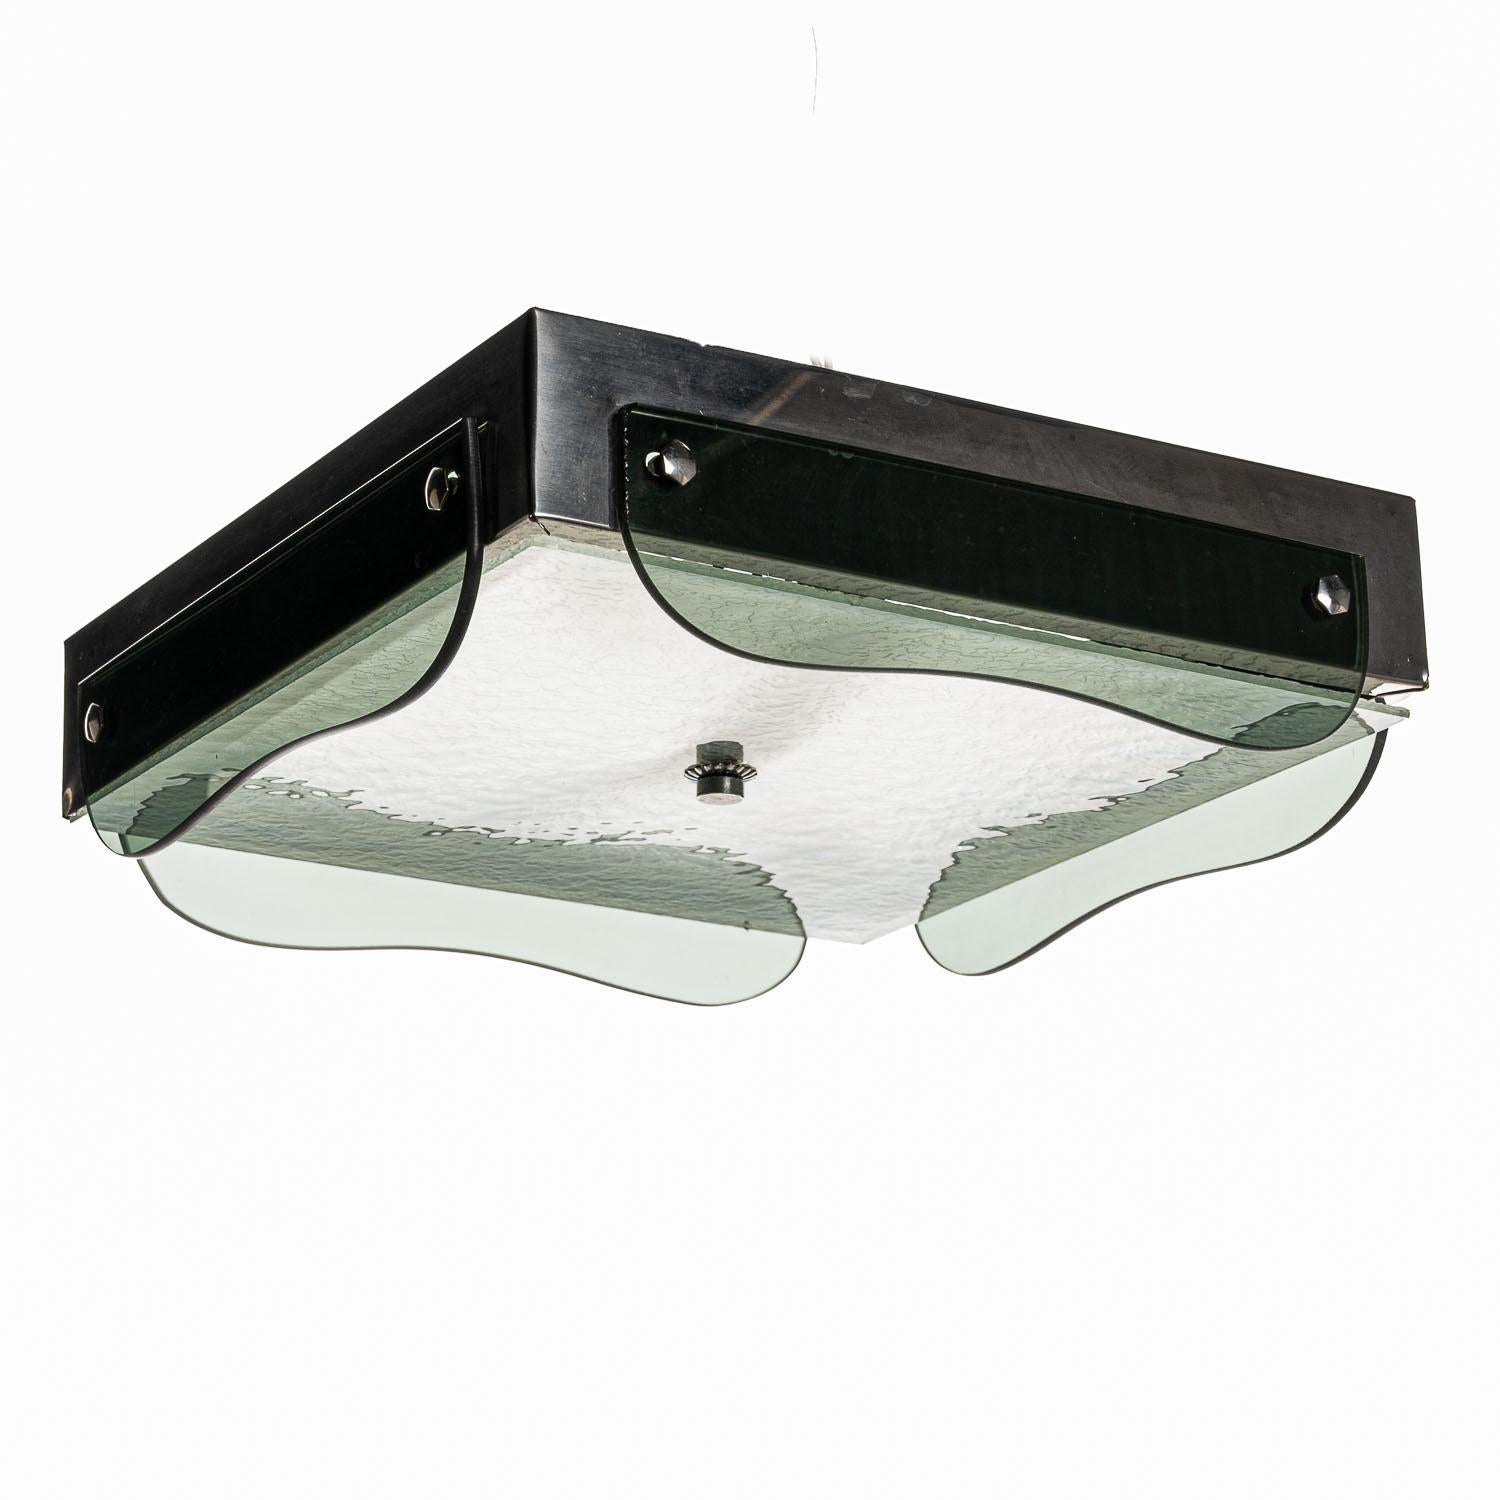 This is a beautiful 1940s flush-mount piece by Veca. The square glass and aluminium construction is in good condition, with the some noticeable markings on the upper aluminium base. The understated design adds a charm to this light.

In full working